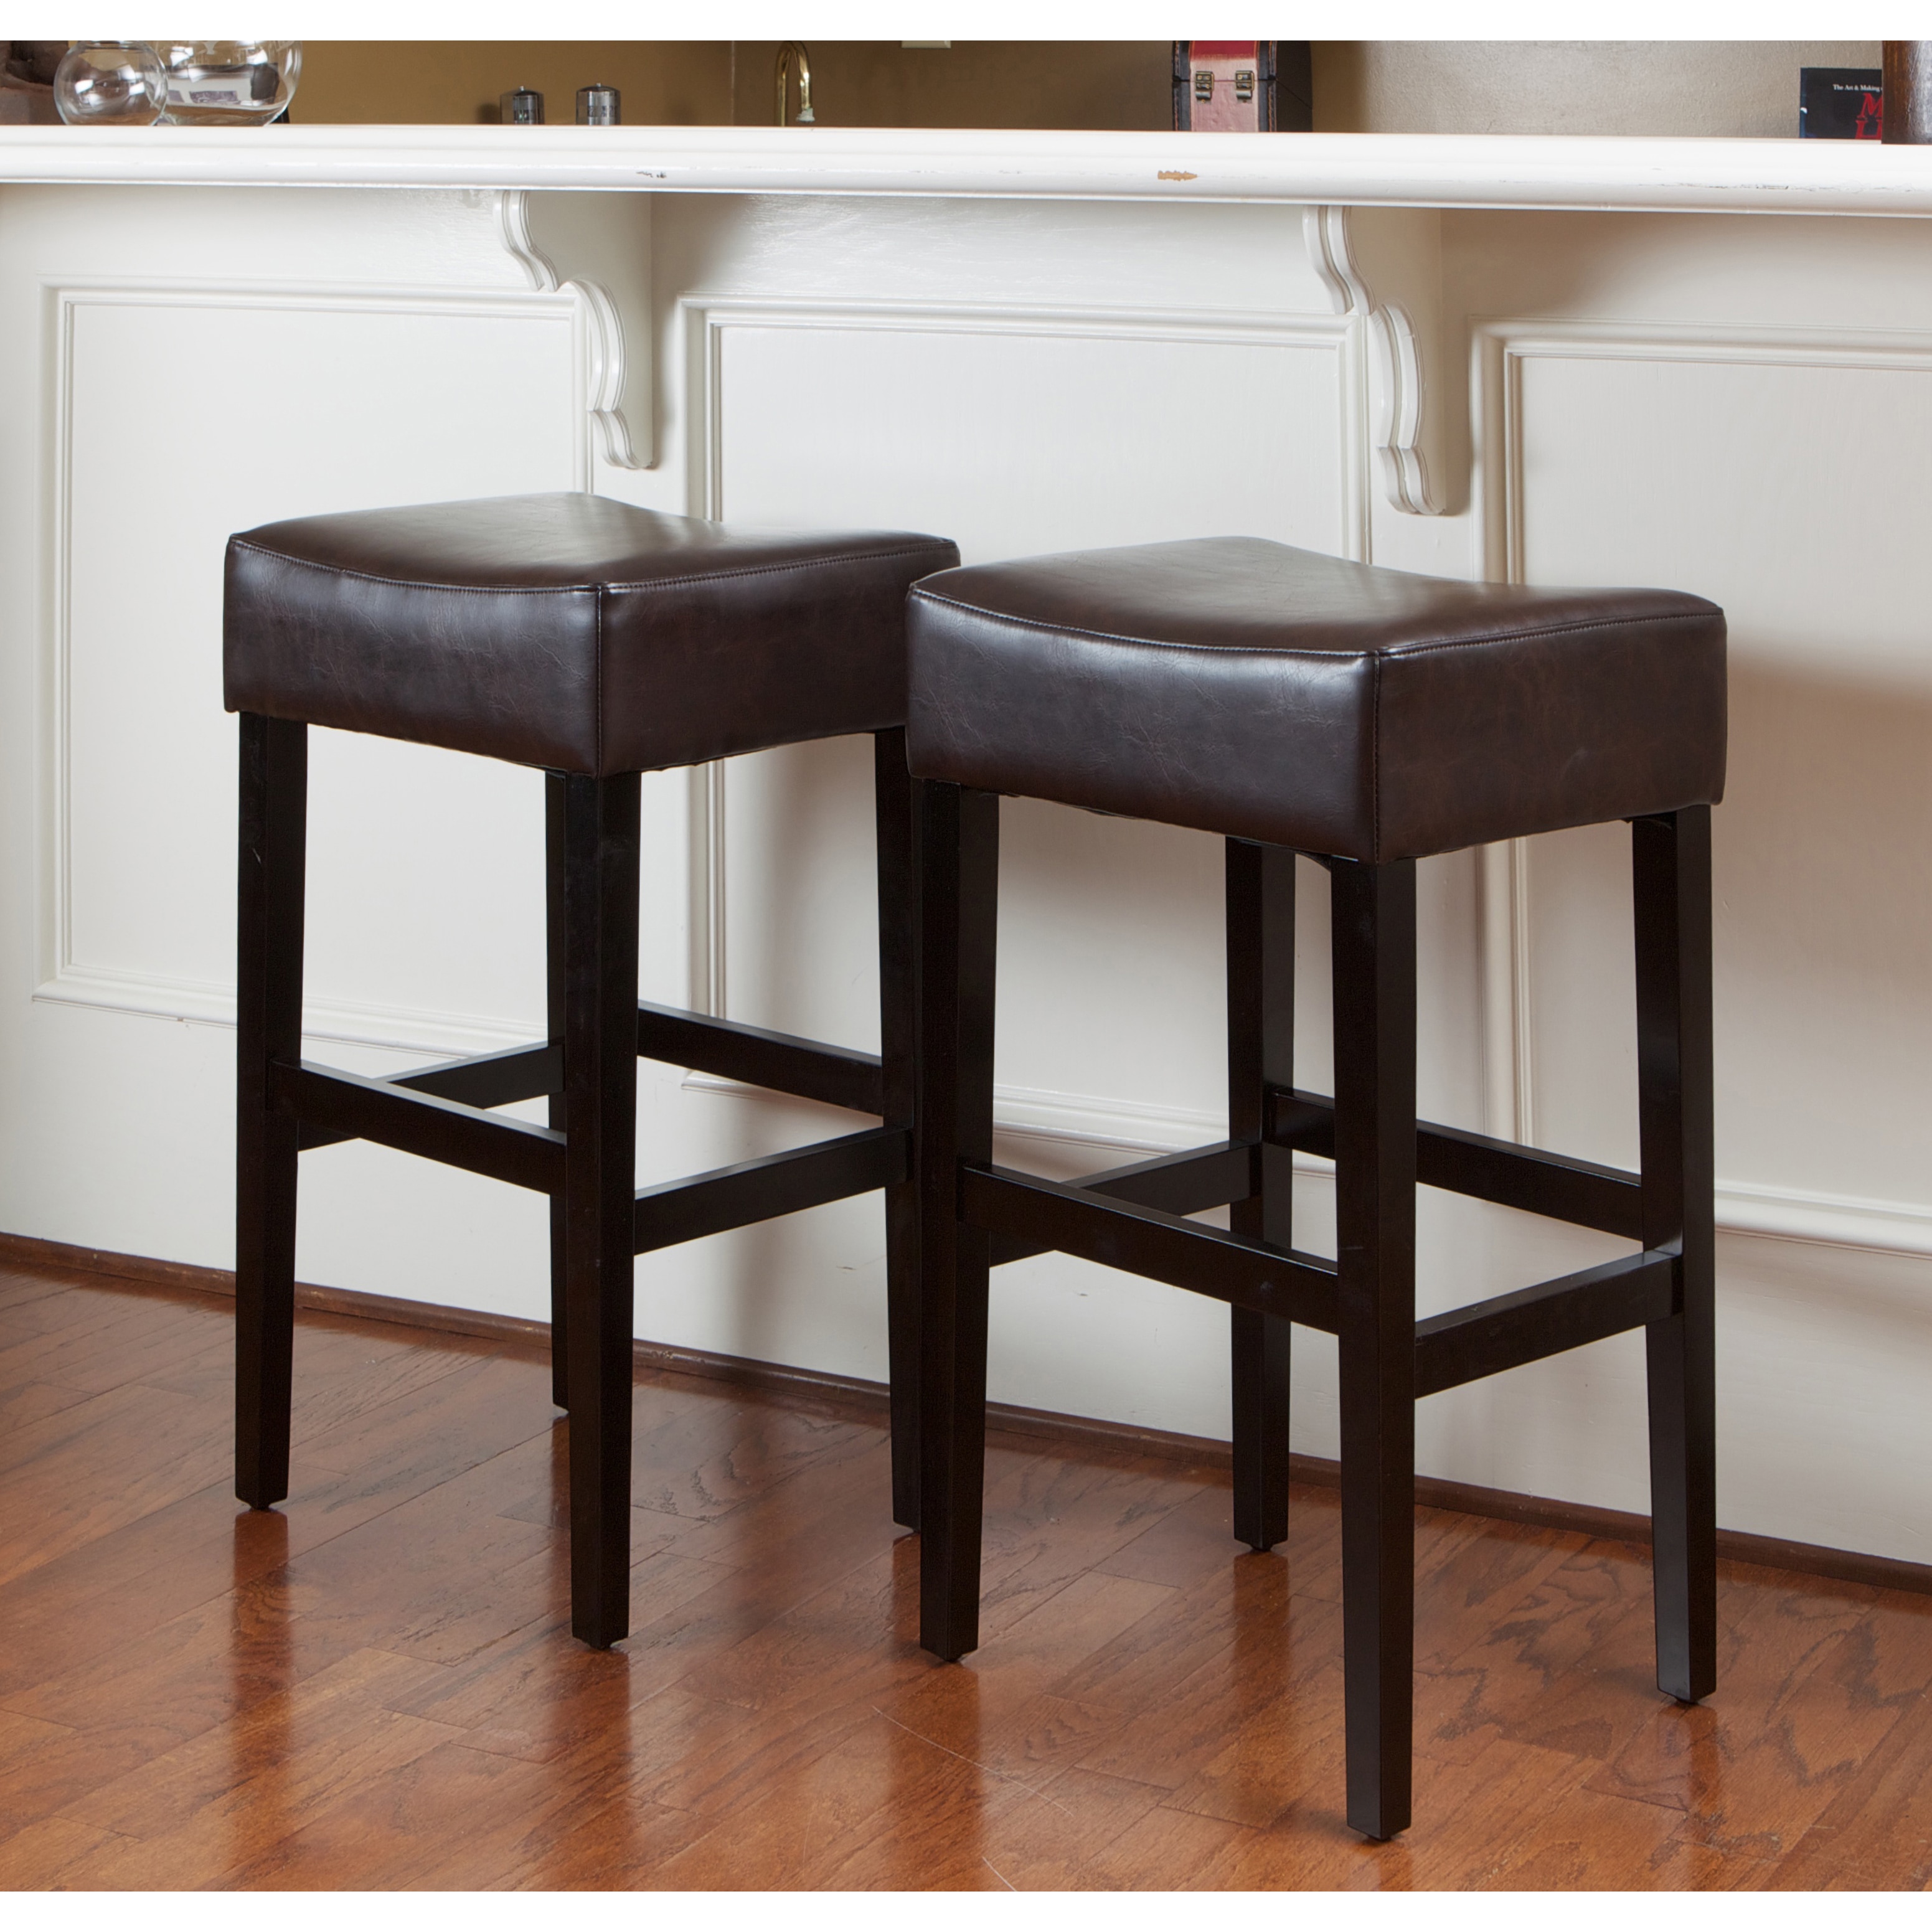 Shop Lopez 30-inch Brown Leather Backless Bar Stools (Set of 2) by